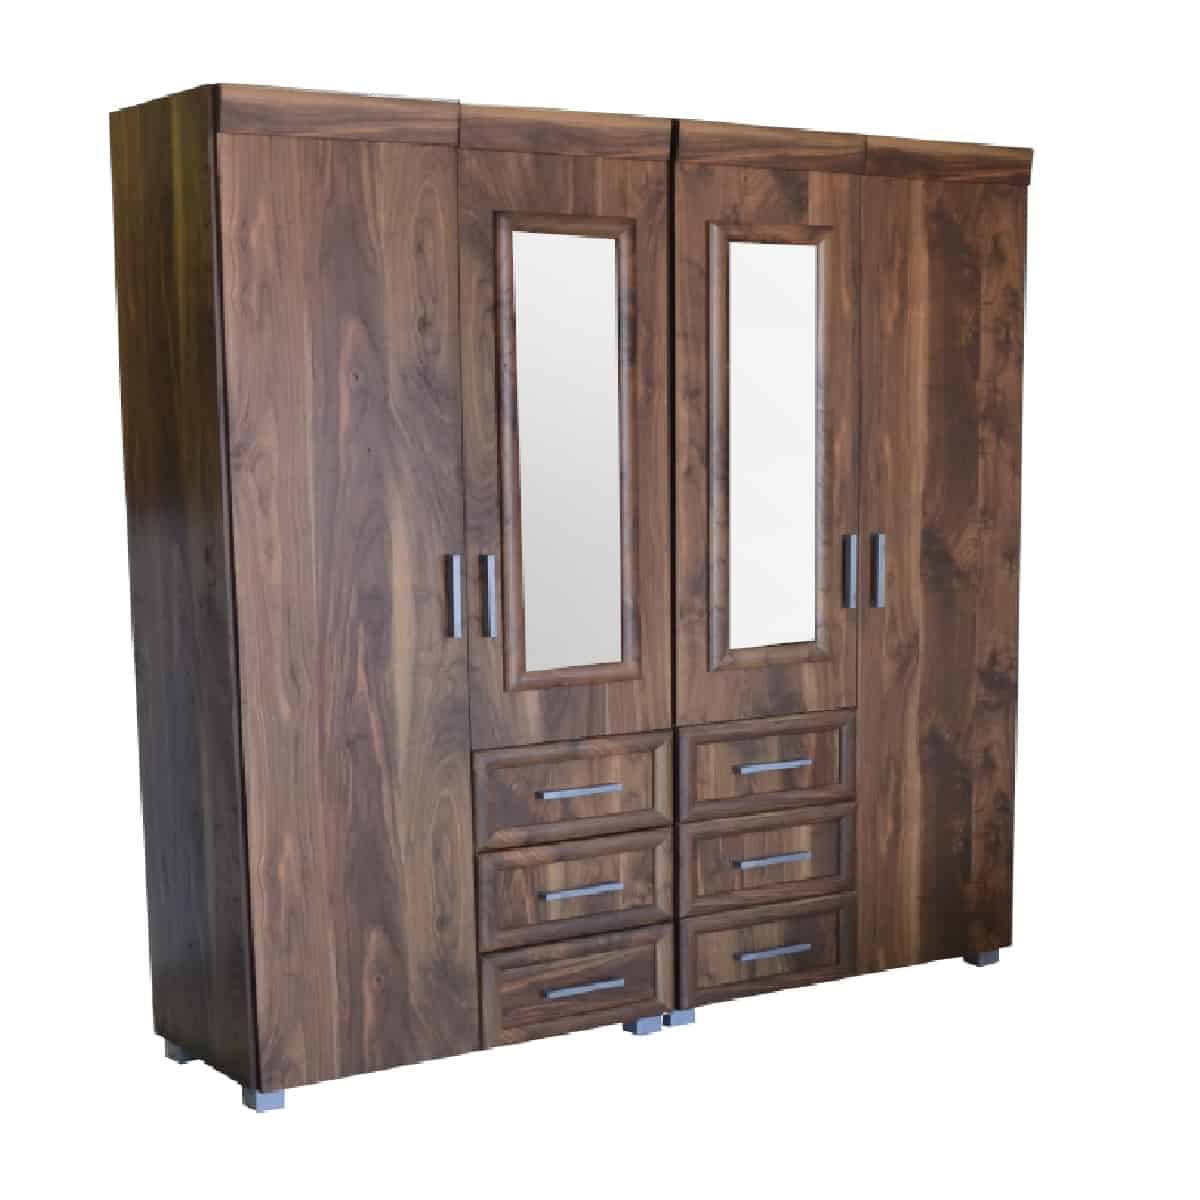 brown-wood-wardrobe-1.7m-and-raised-local-made-strong-5-star-furniture